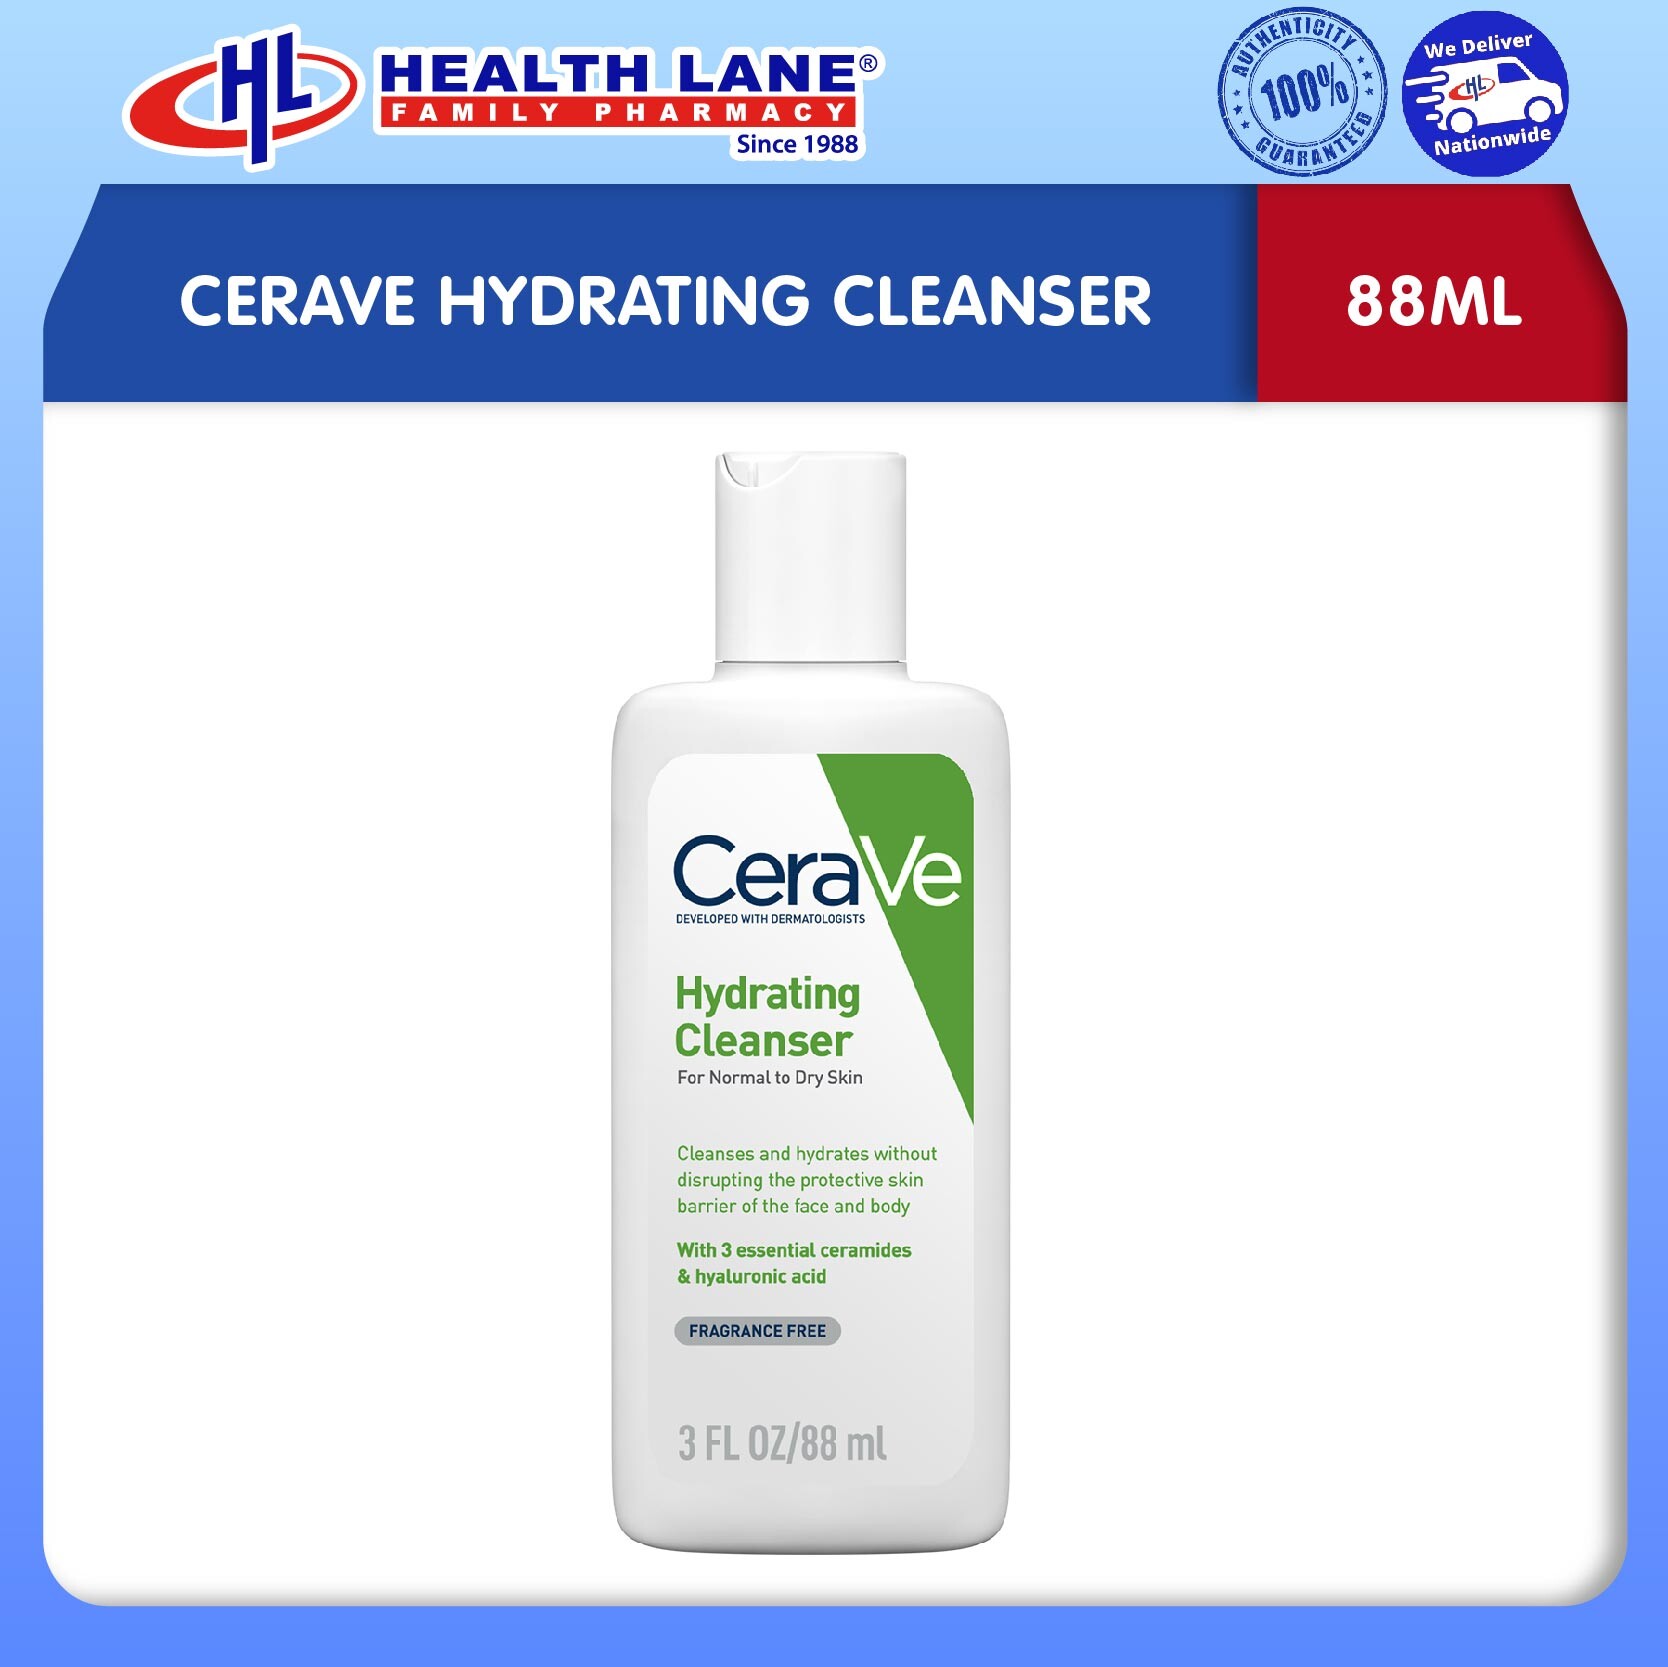 CERAVE HYDRATING CLEANSER (88ML)